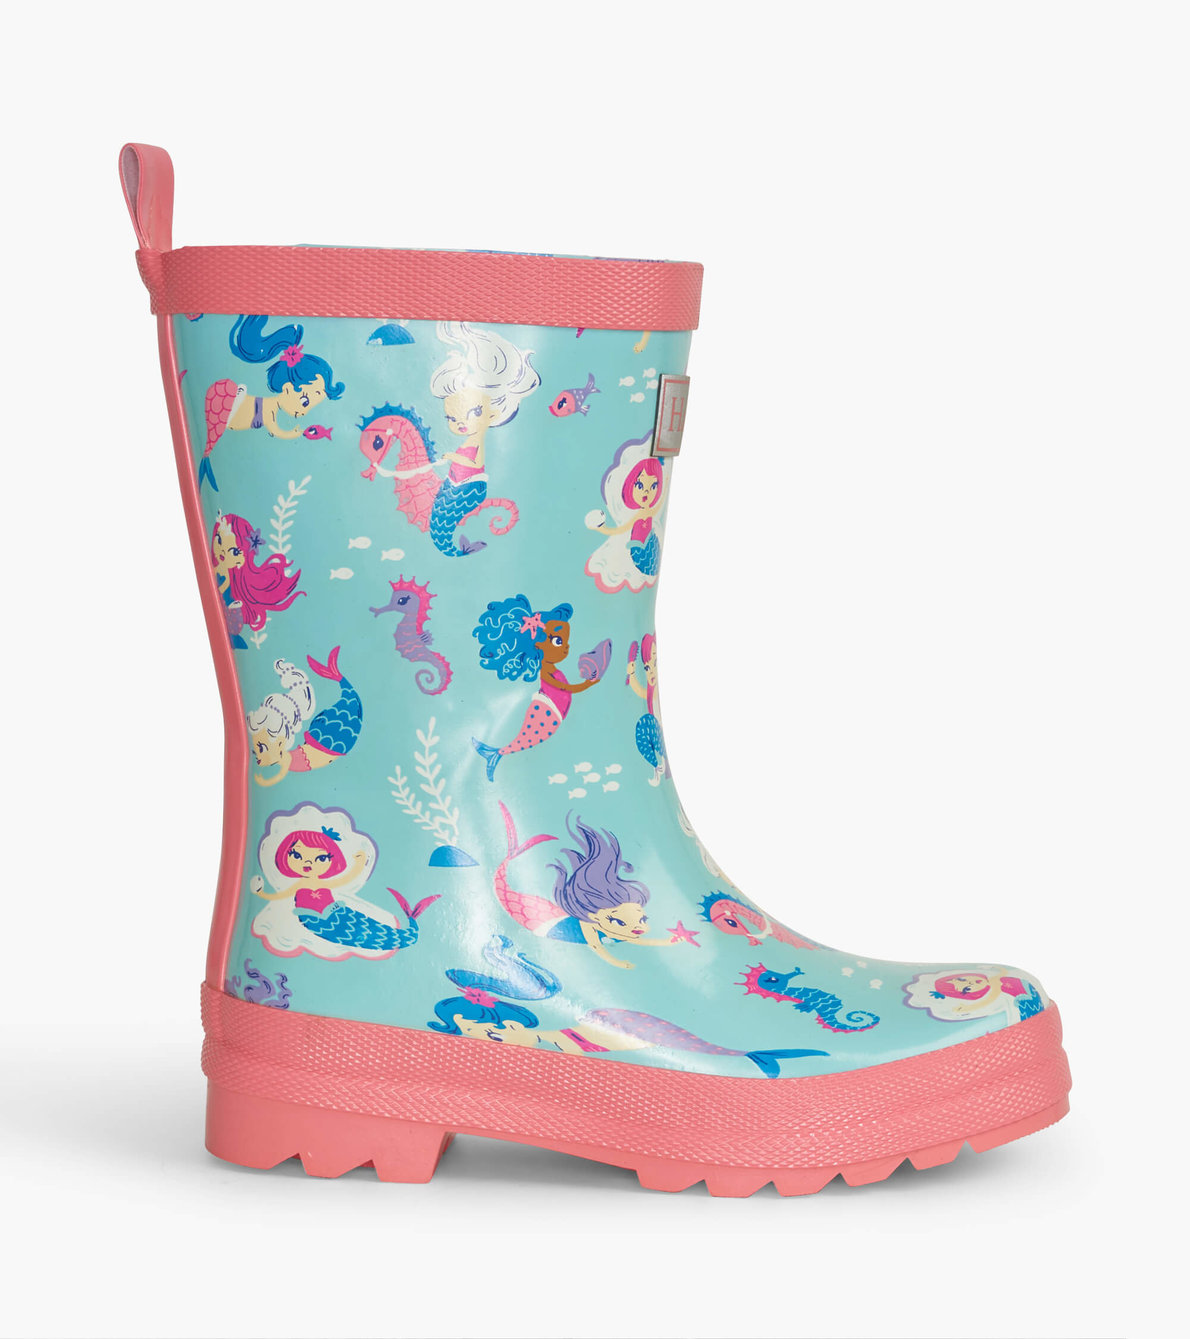 View larger image of Life of Mermaids Rain Boots